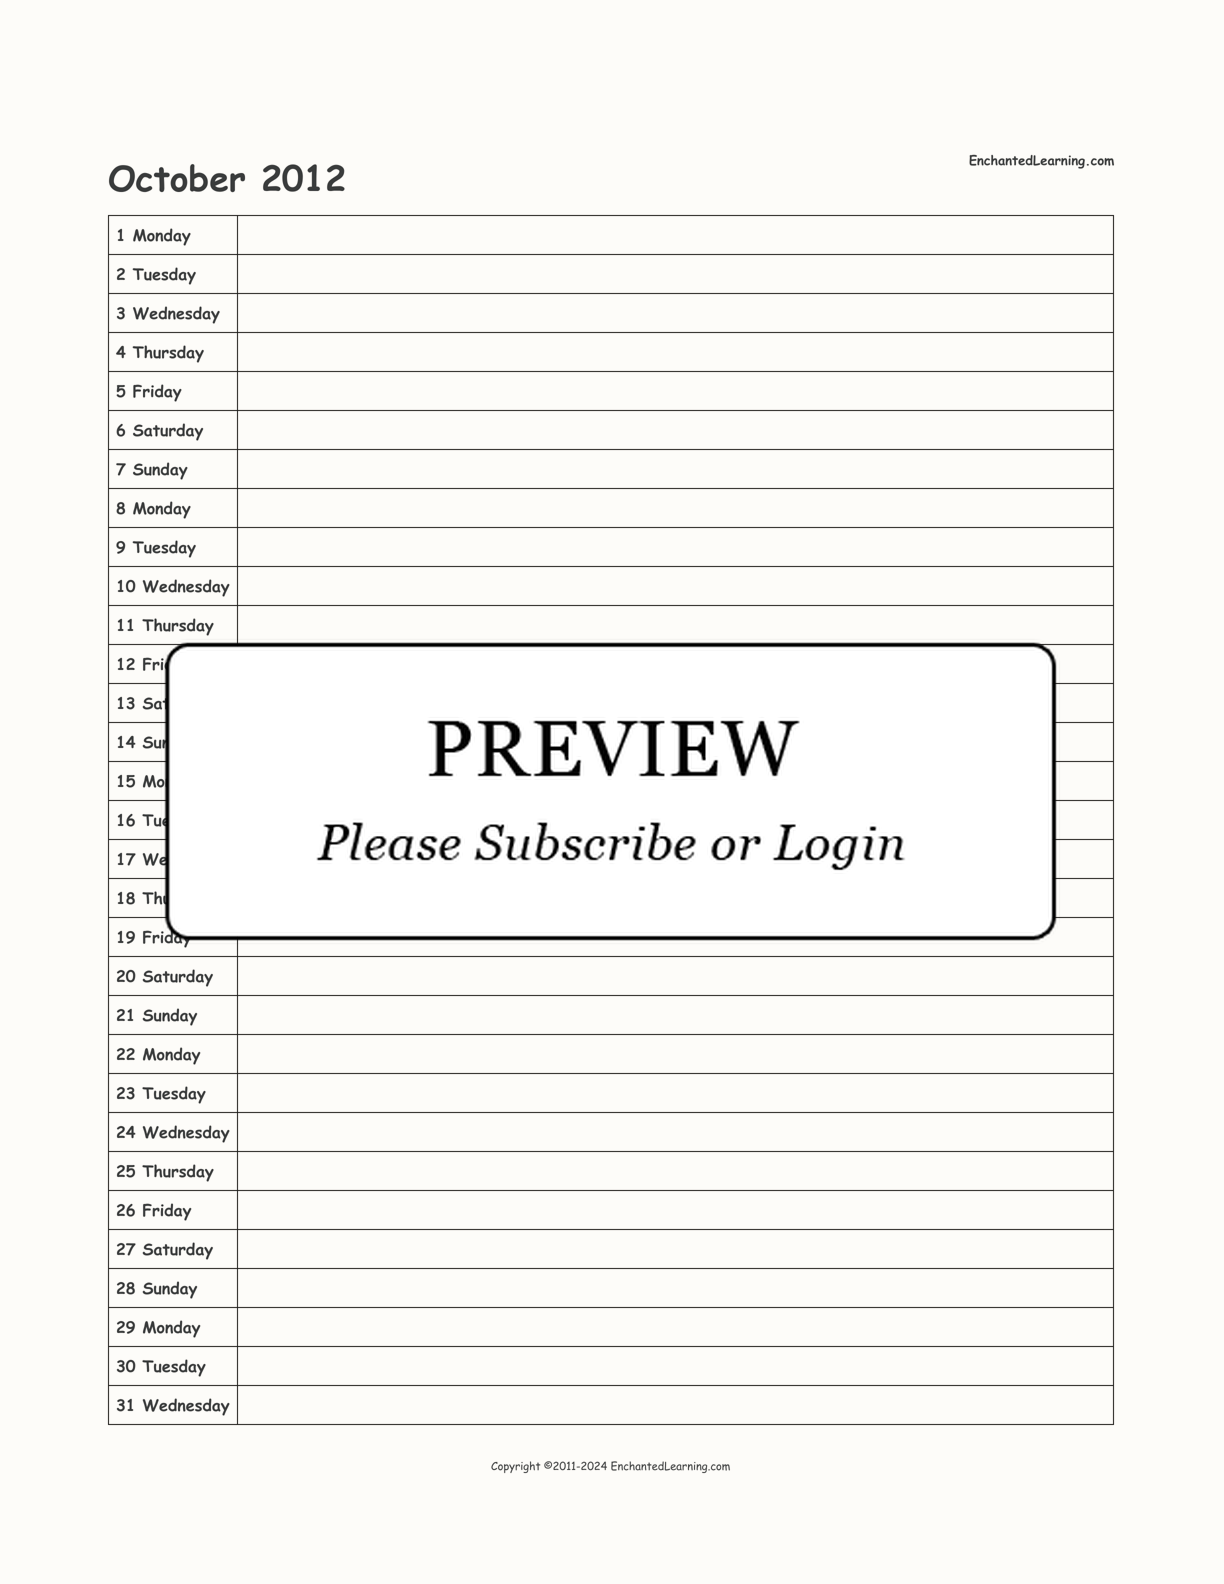 2012 Scheduling Calendar interactive printout page 10